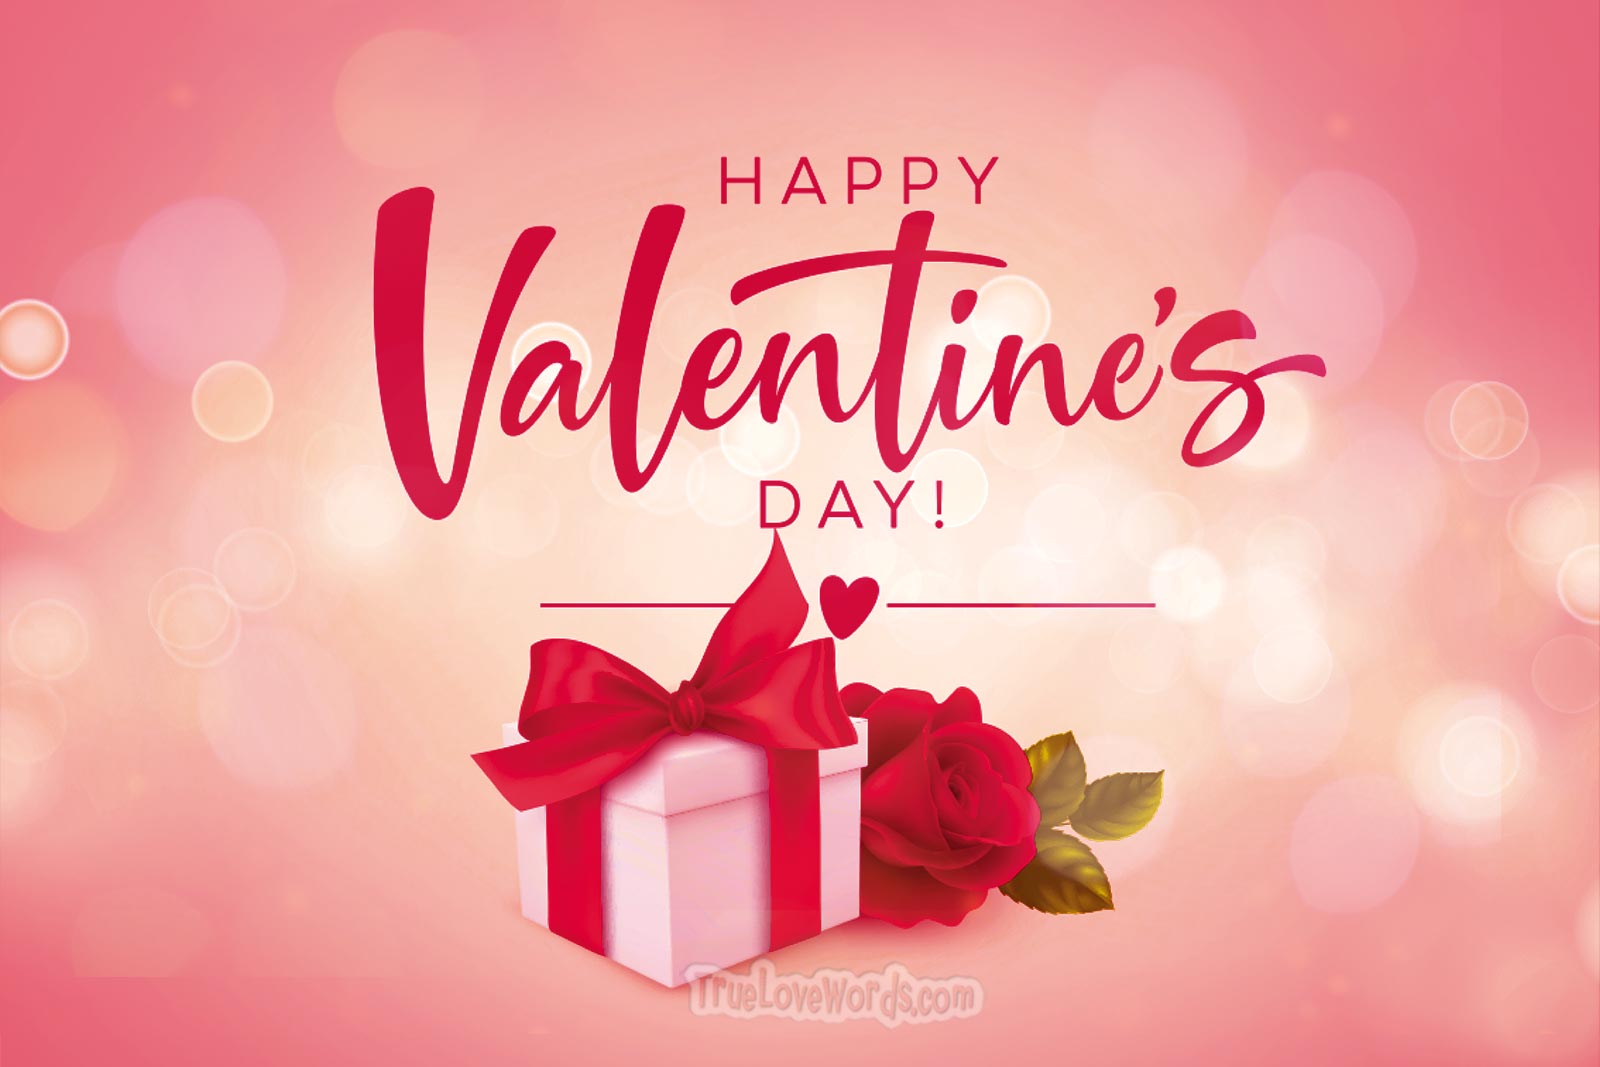 Romantic Valentine S Day Messages For Her True Love Words You are my sweetheart, and i am glad you're mine. day messages for her true love words